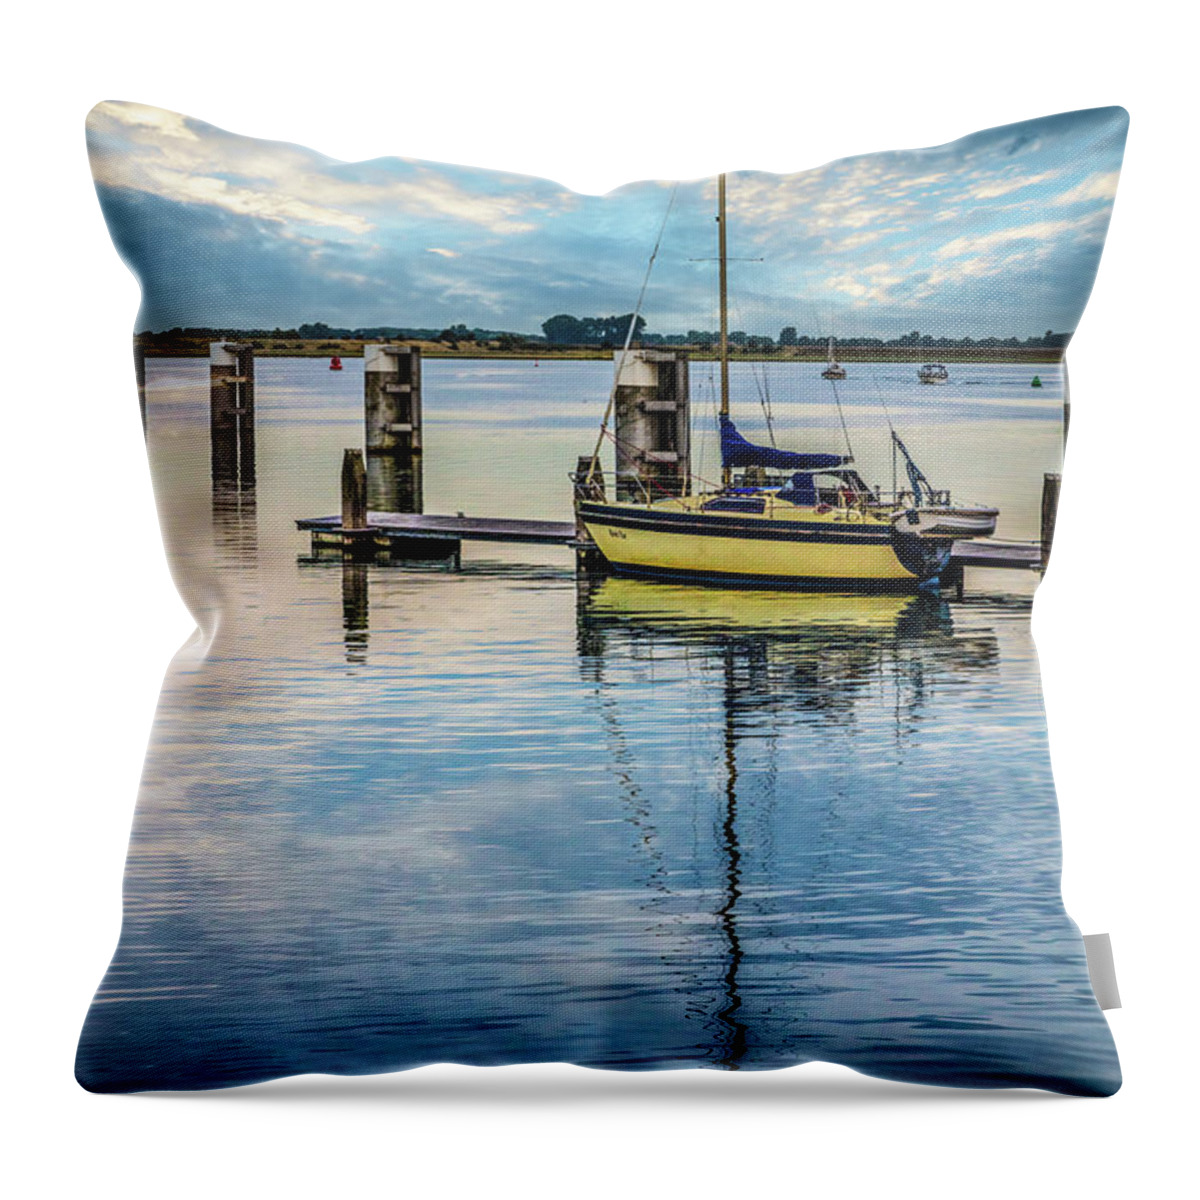 Boats Throw Pillow featuring the photograph Sailboat in a Peaceful Harbor by Debra and Dave Vanderlaan